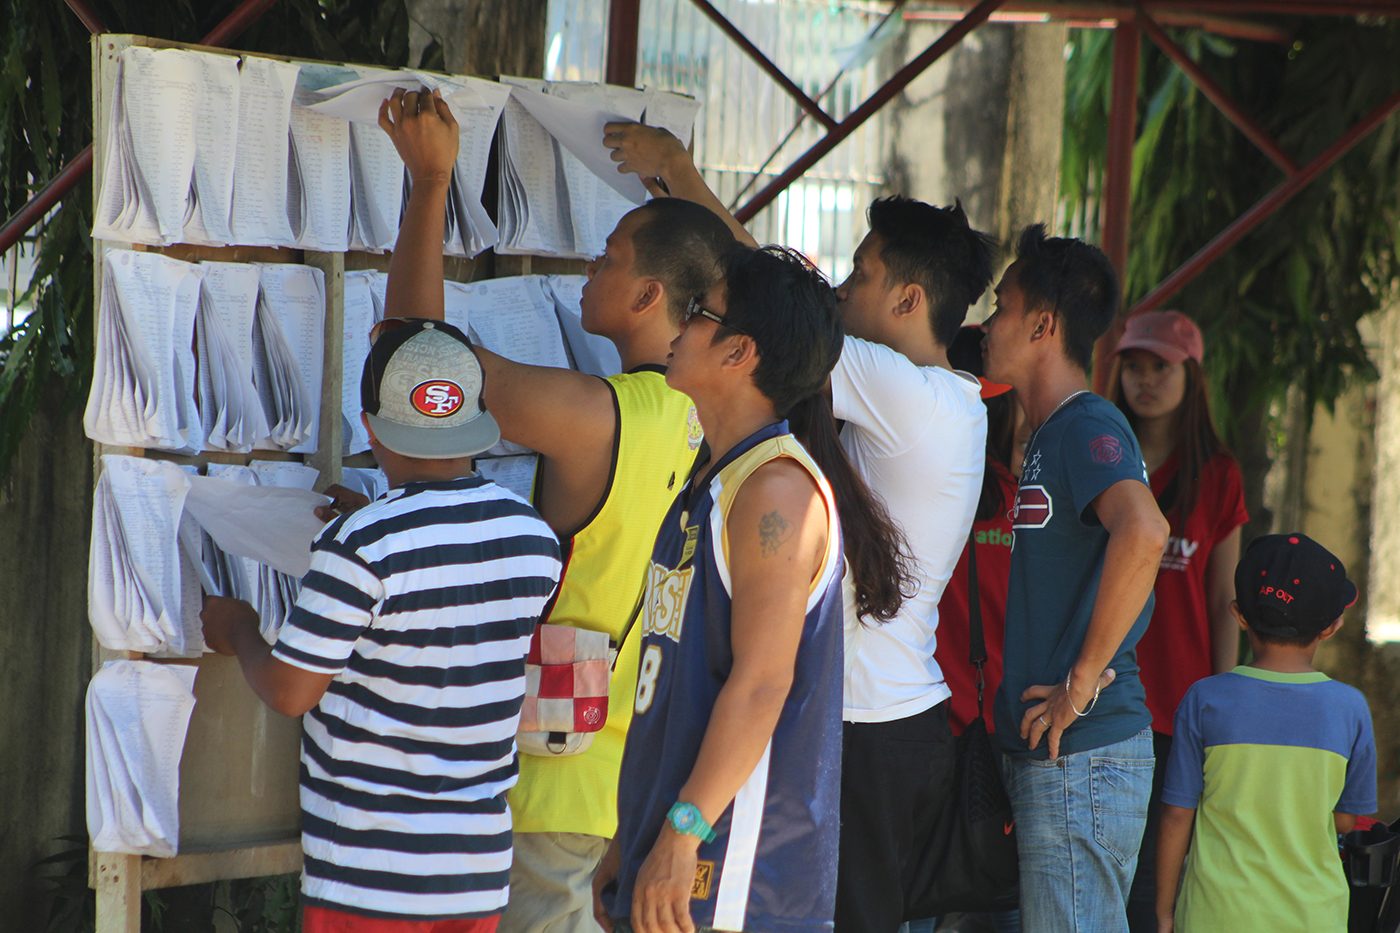 In Aklan, public markets, covered courts are polling places, too